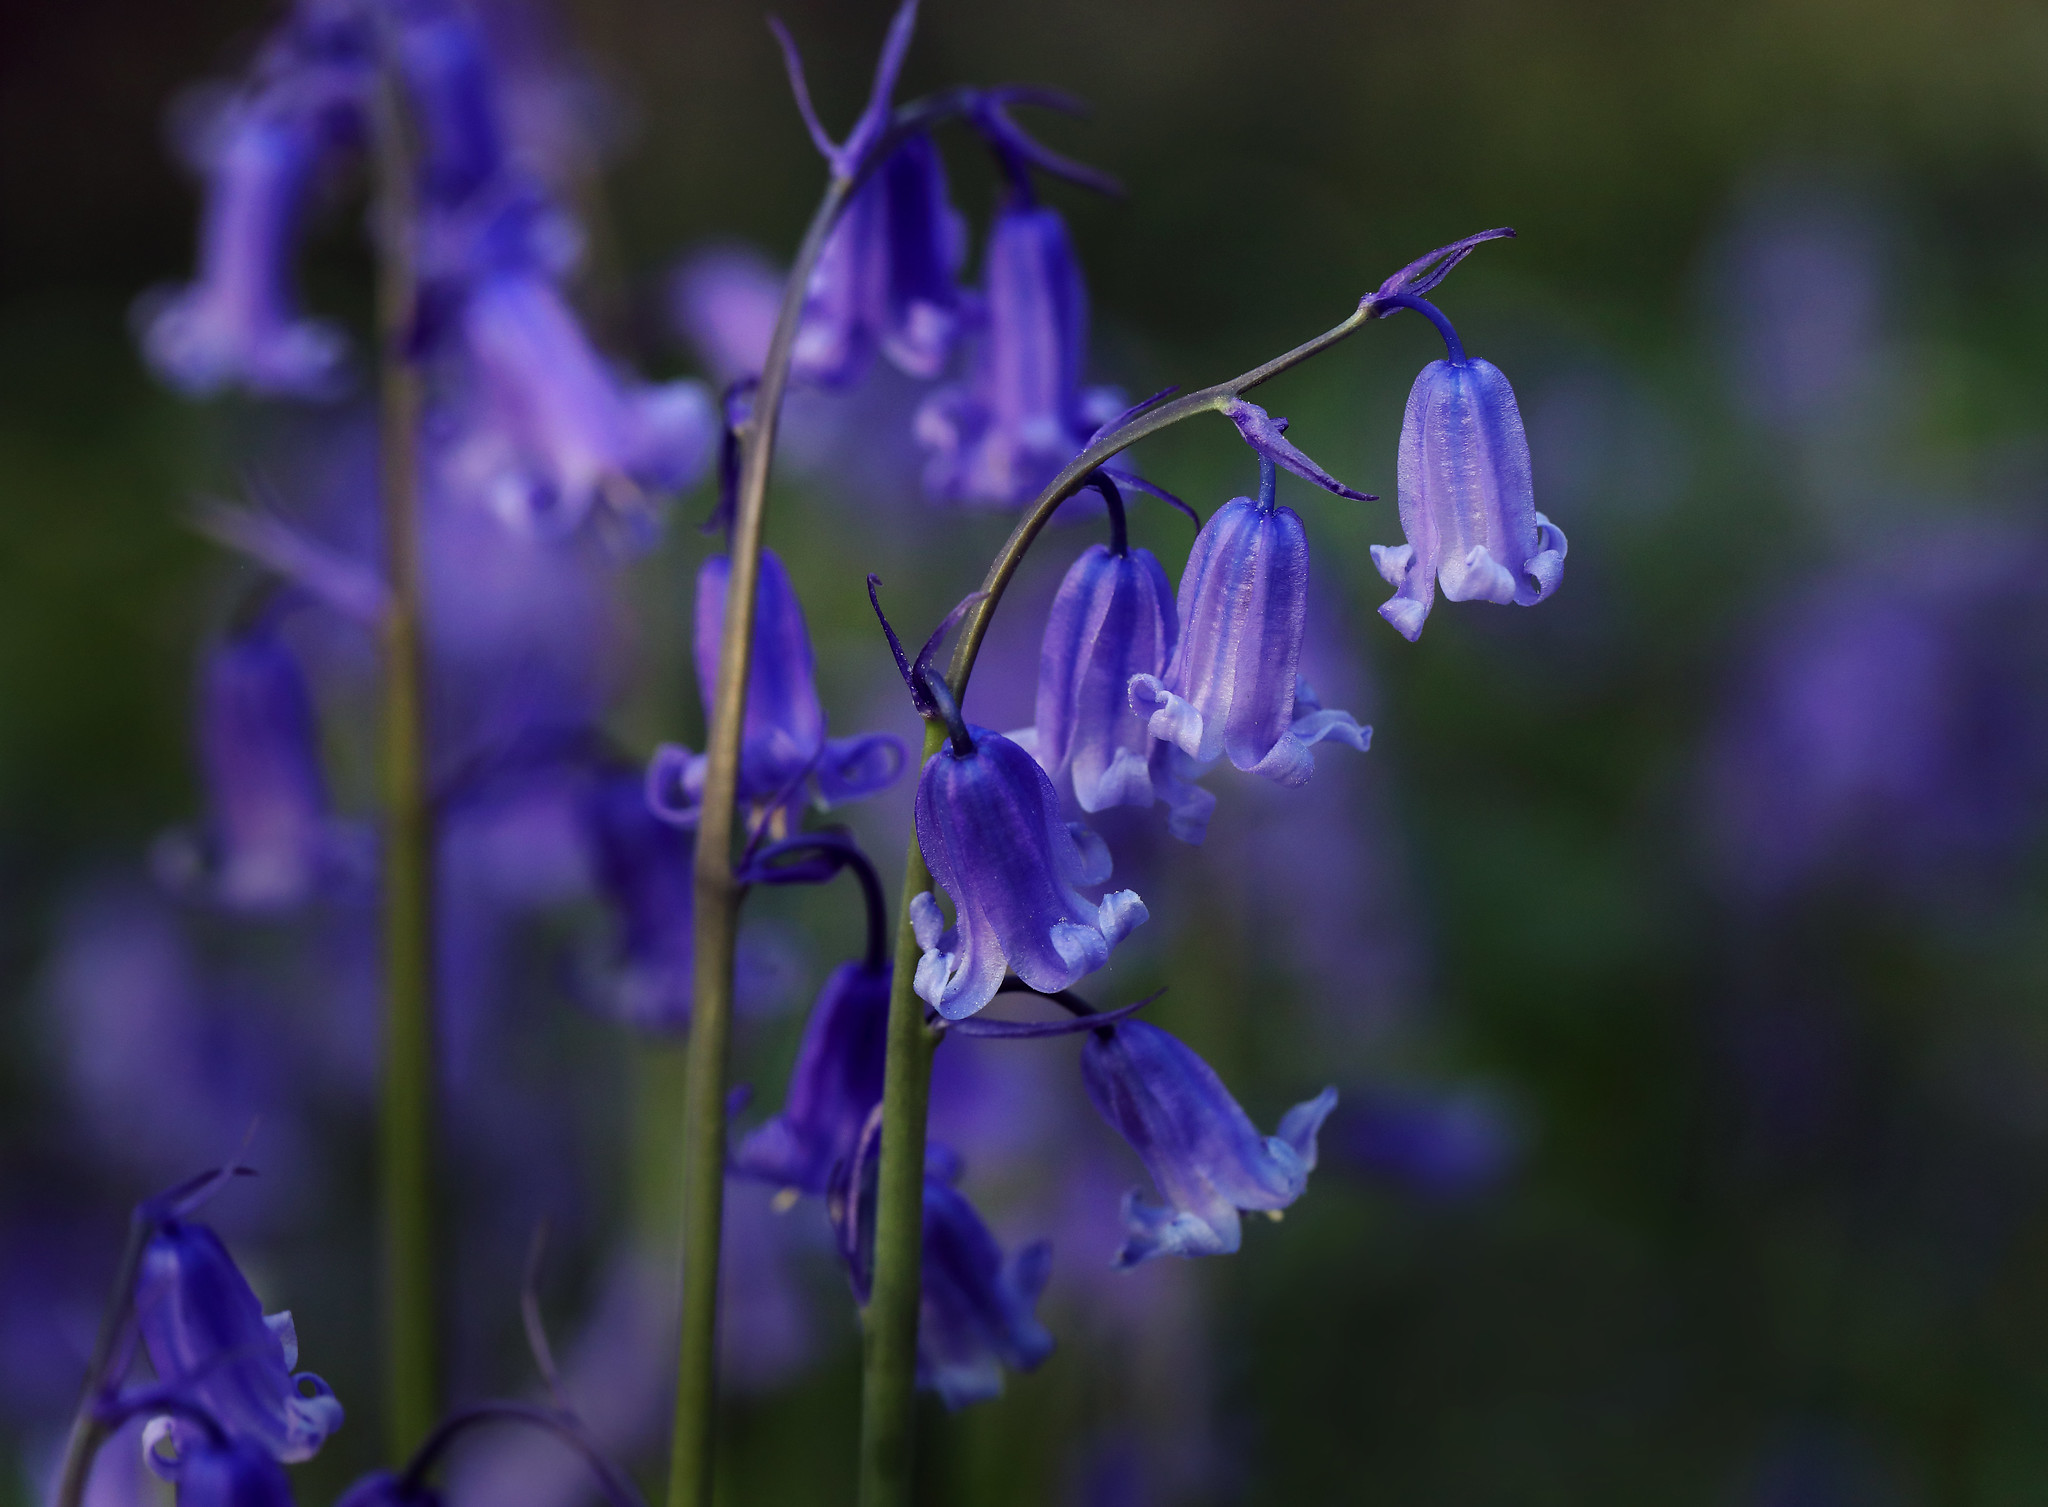 Bluebells - The Gorgeous, yet Poisonous, Enchantress - Vision Times